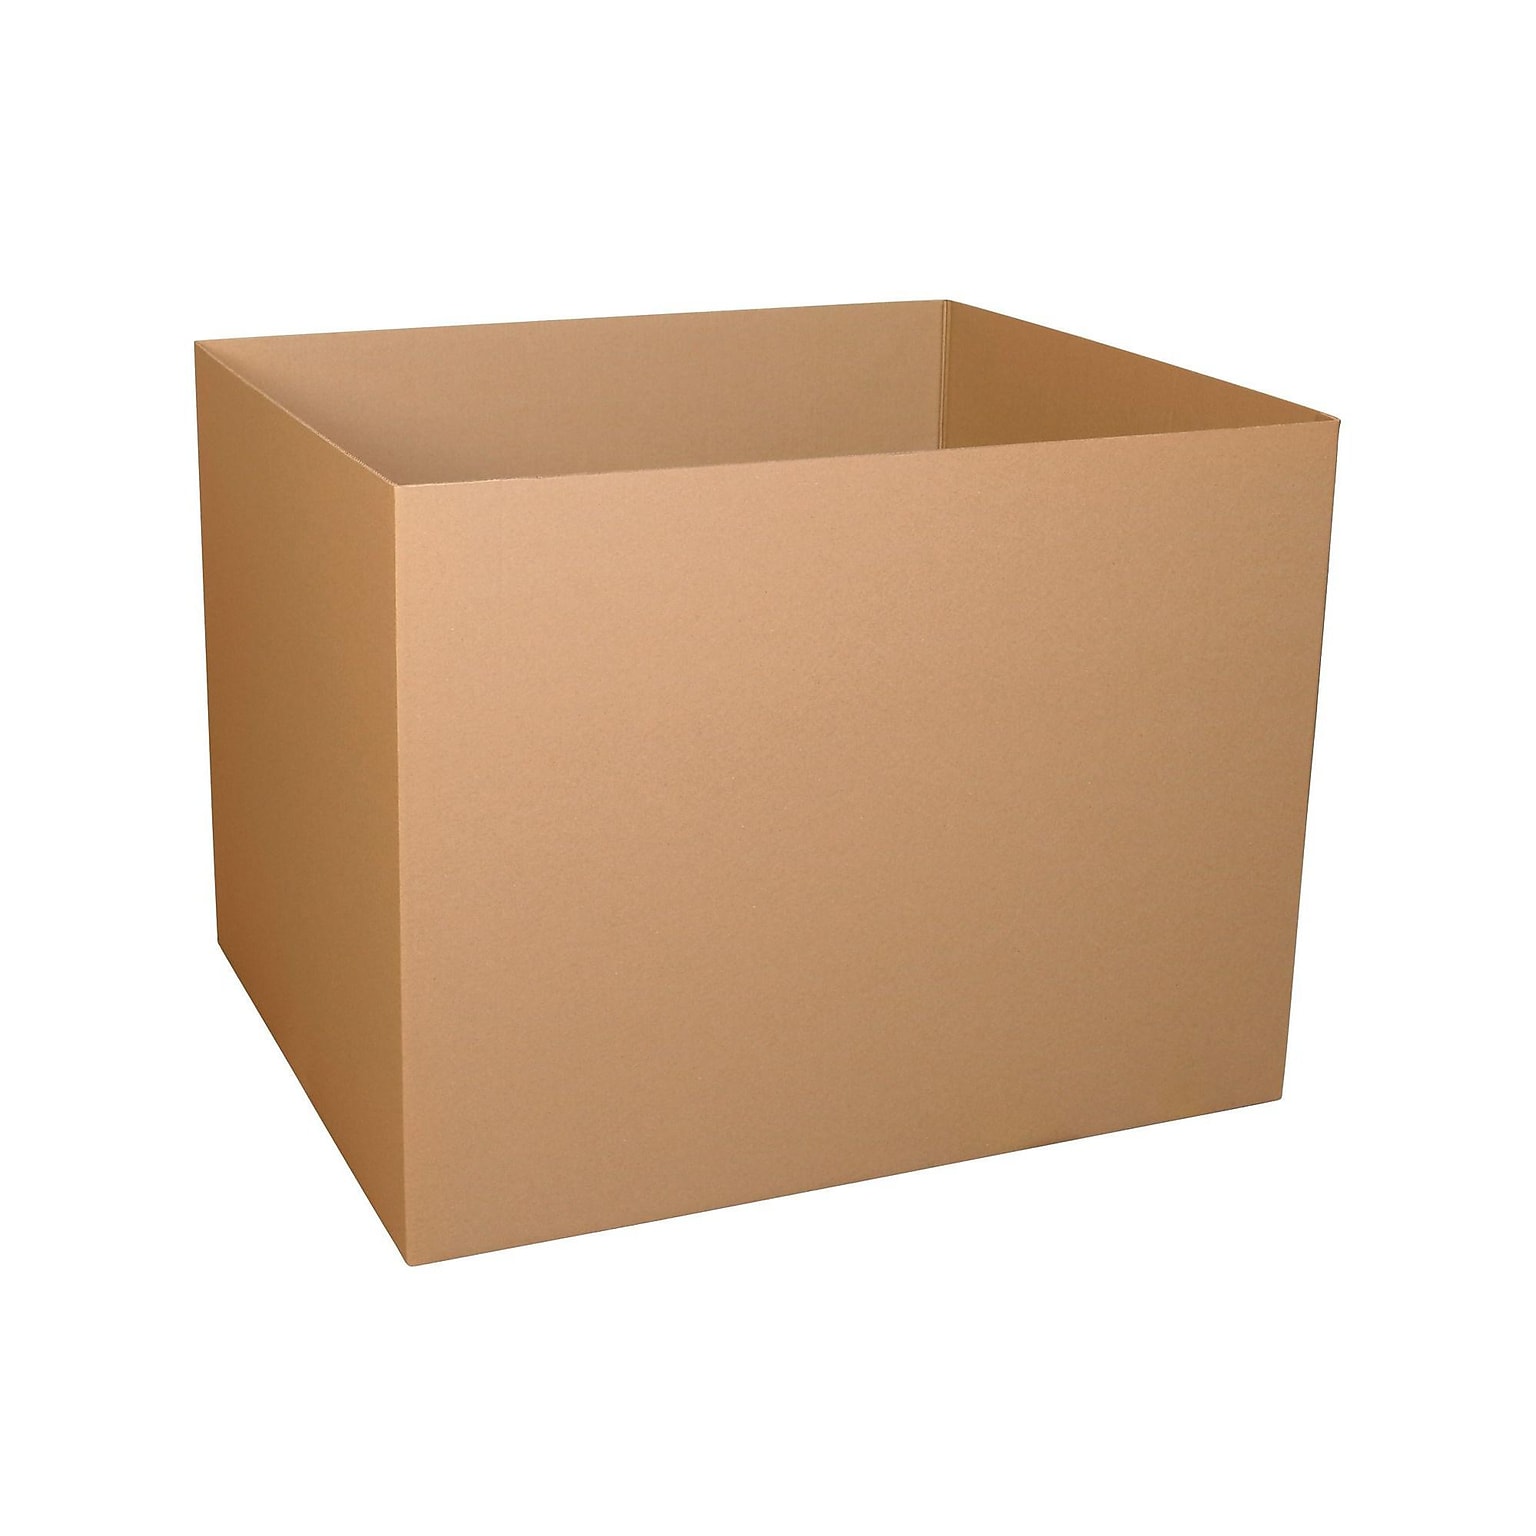 SI Products 48 x 40 x 36 Gaylord Boxes, ECT Rated, Double Wall, Brown, 5/Bundle (BSCGAYLORDDW)